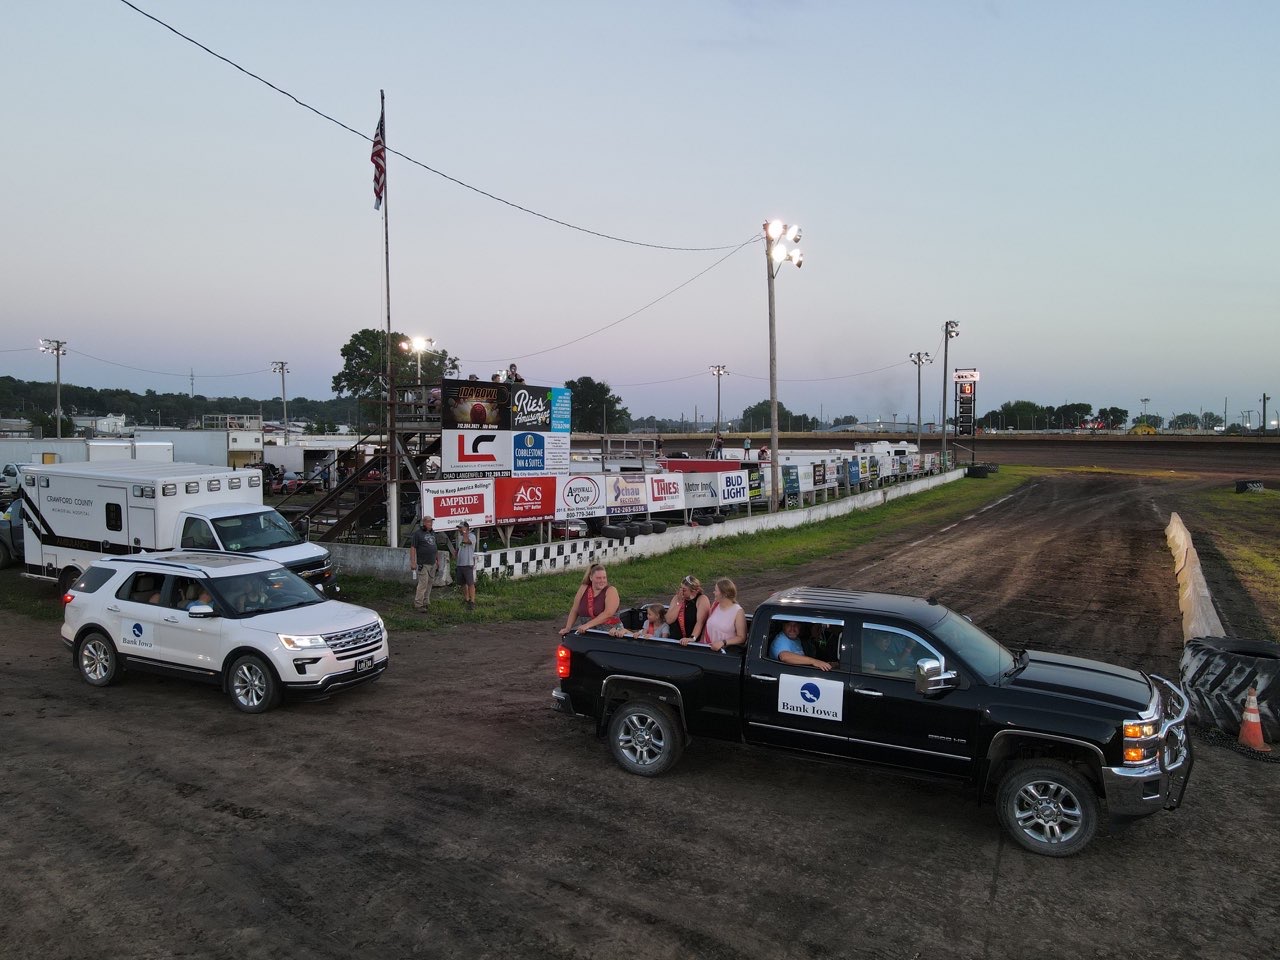 A truck and SUV with Bank Iowa logos at the speedway